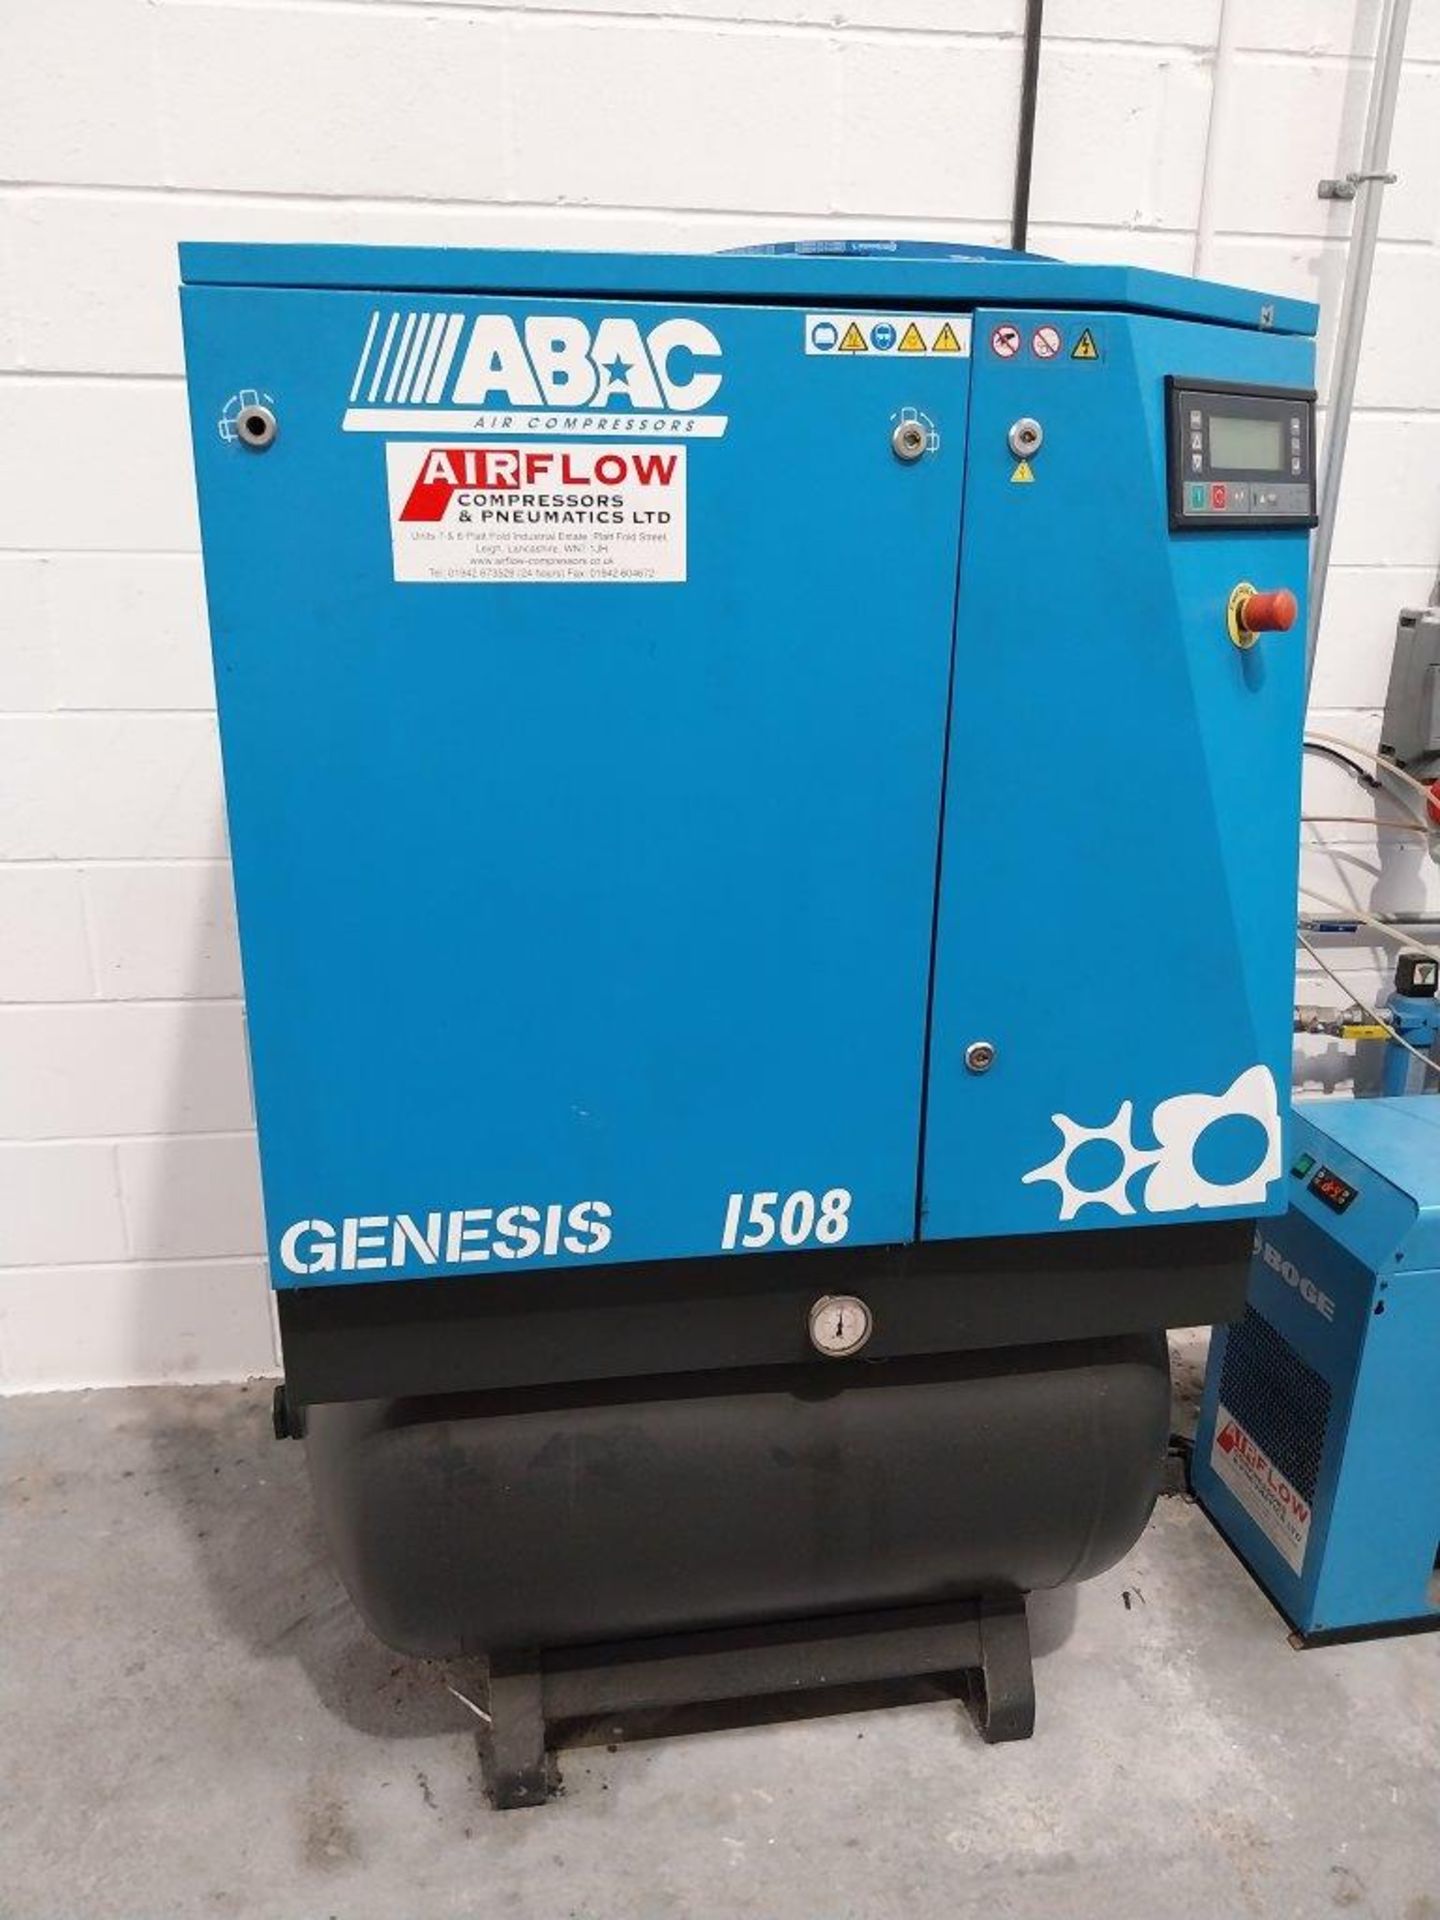 ABAC Genesis 1508 8 bar screw compressor Serial number ITR0108981, free air delivery 2.32m³ / min - Image 2 of 5